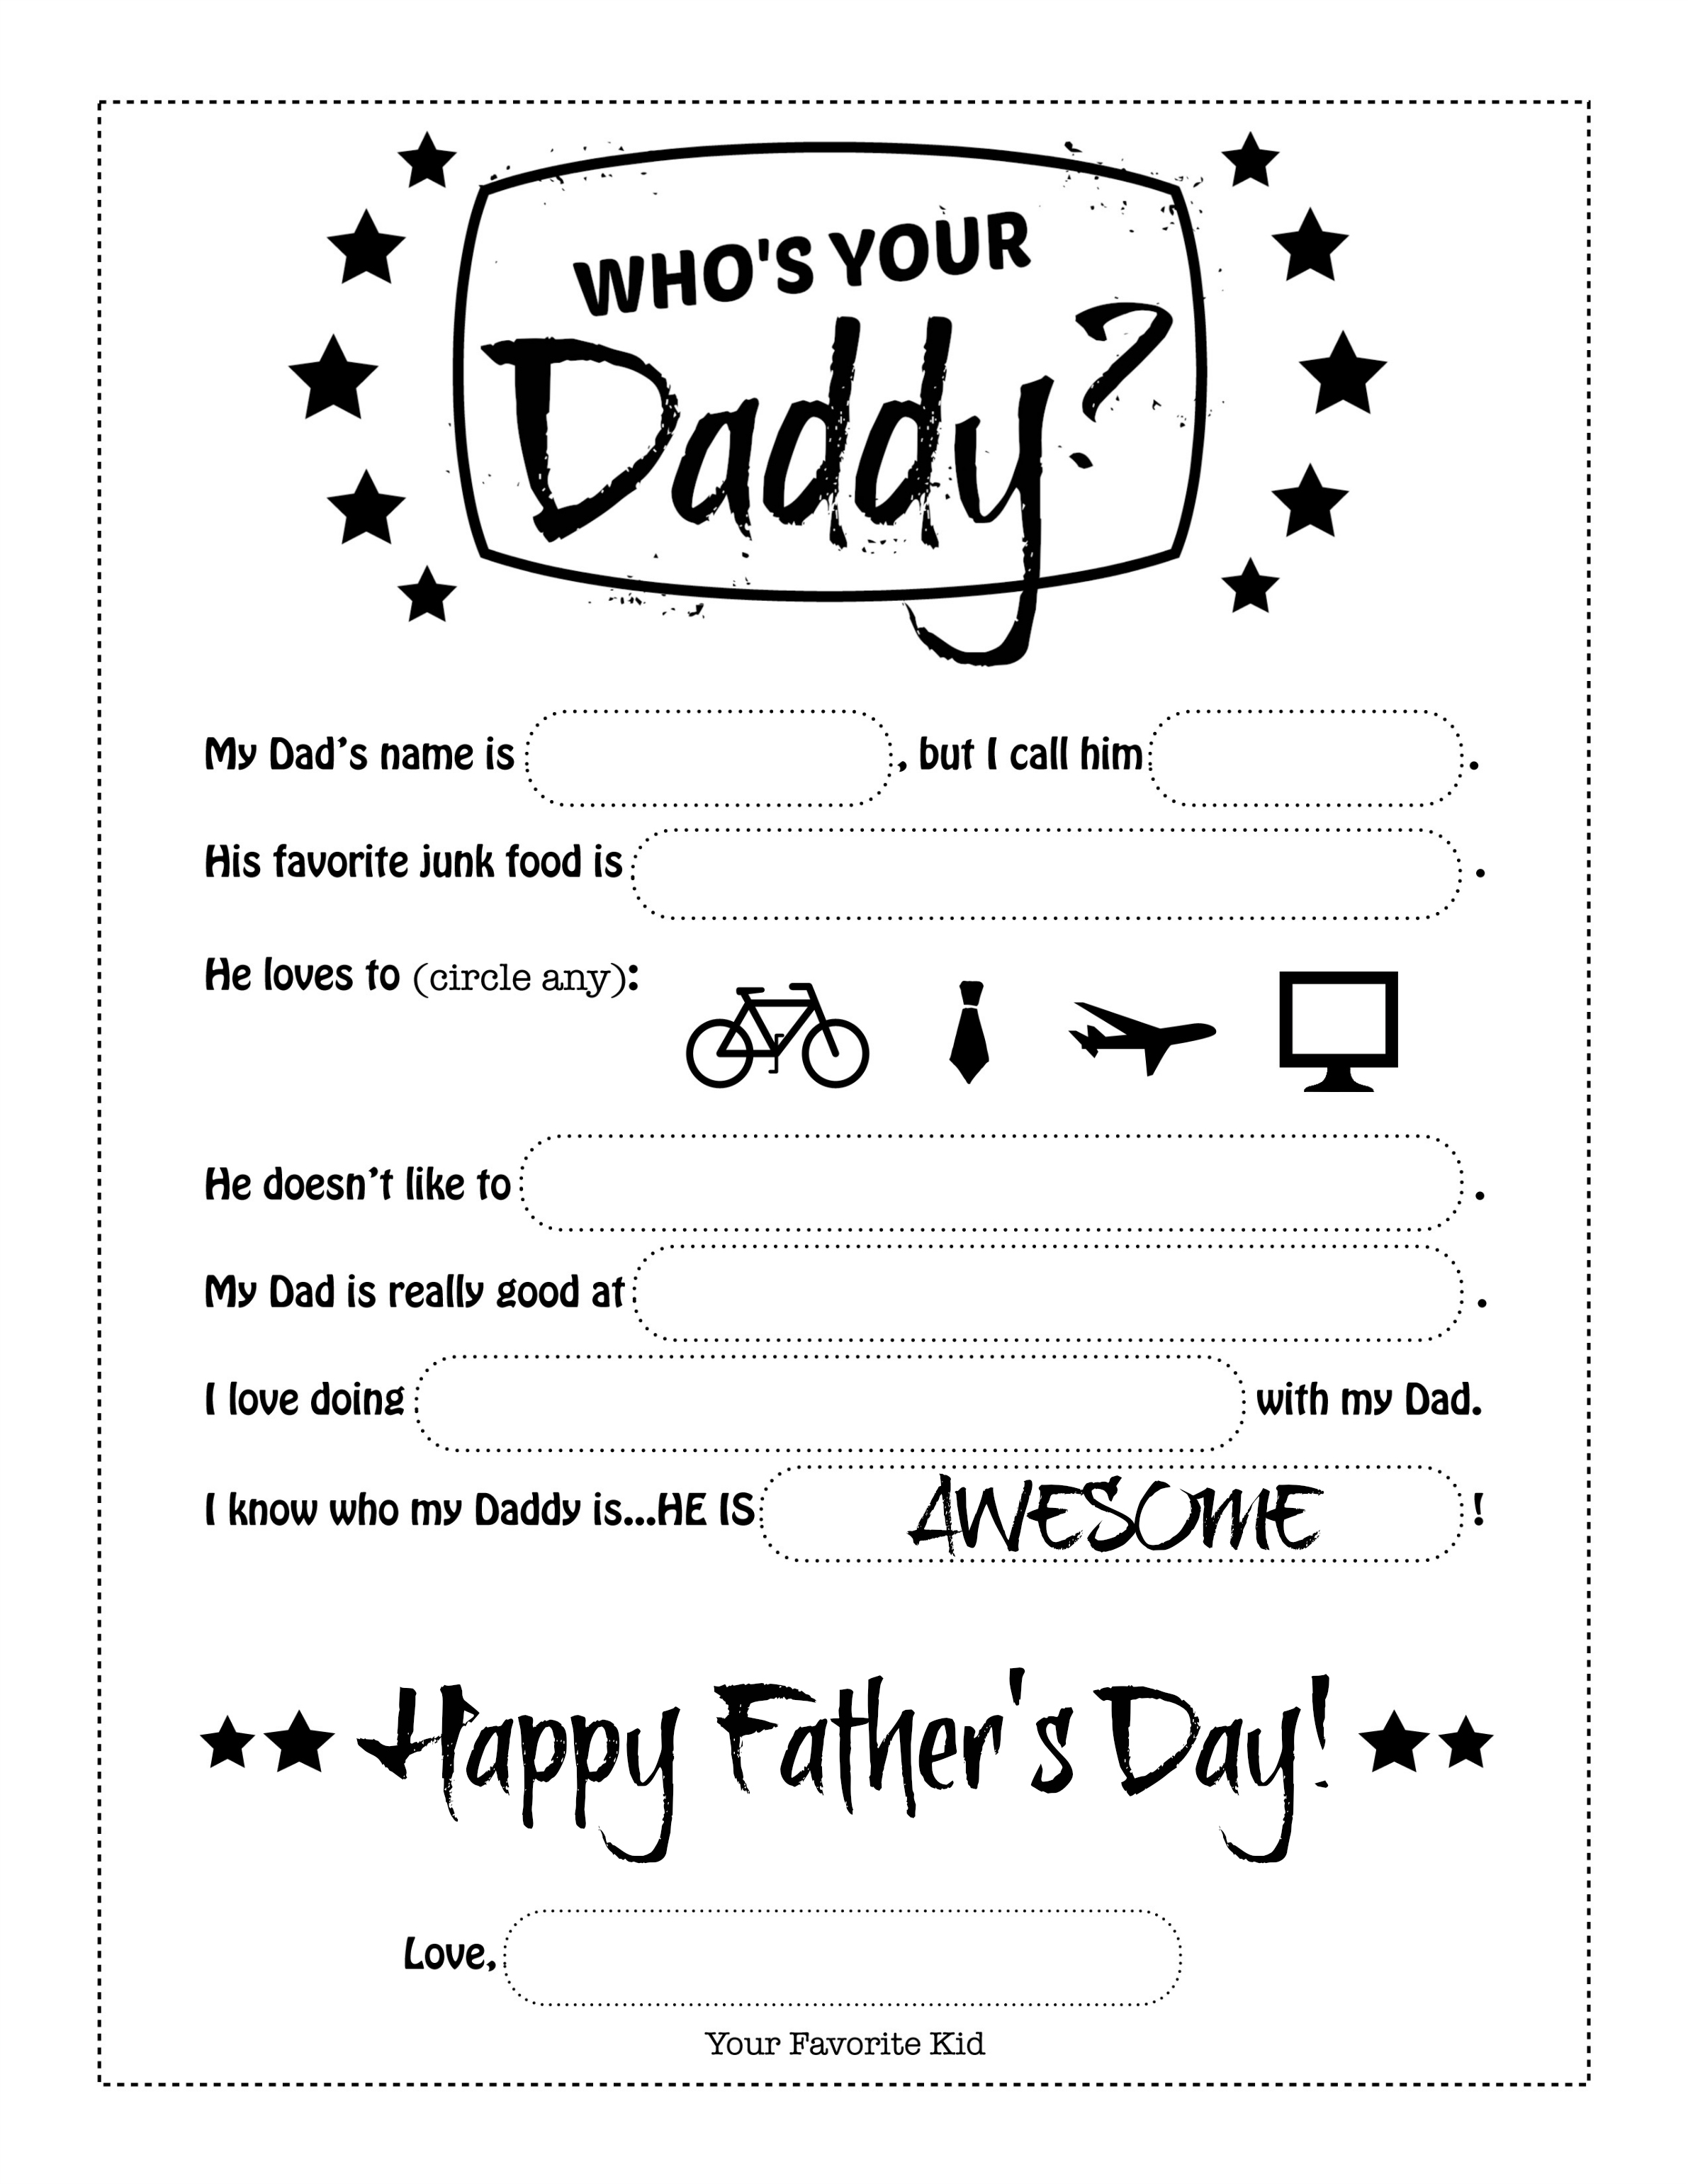 father-s-day-questionnaire-gift-idea-paging-fun-mums